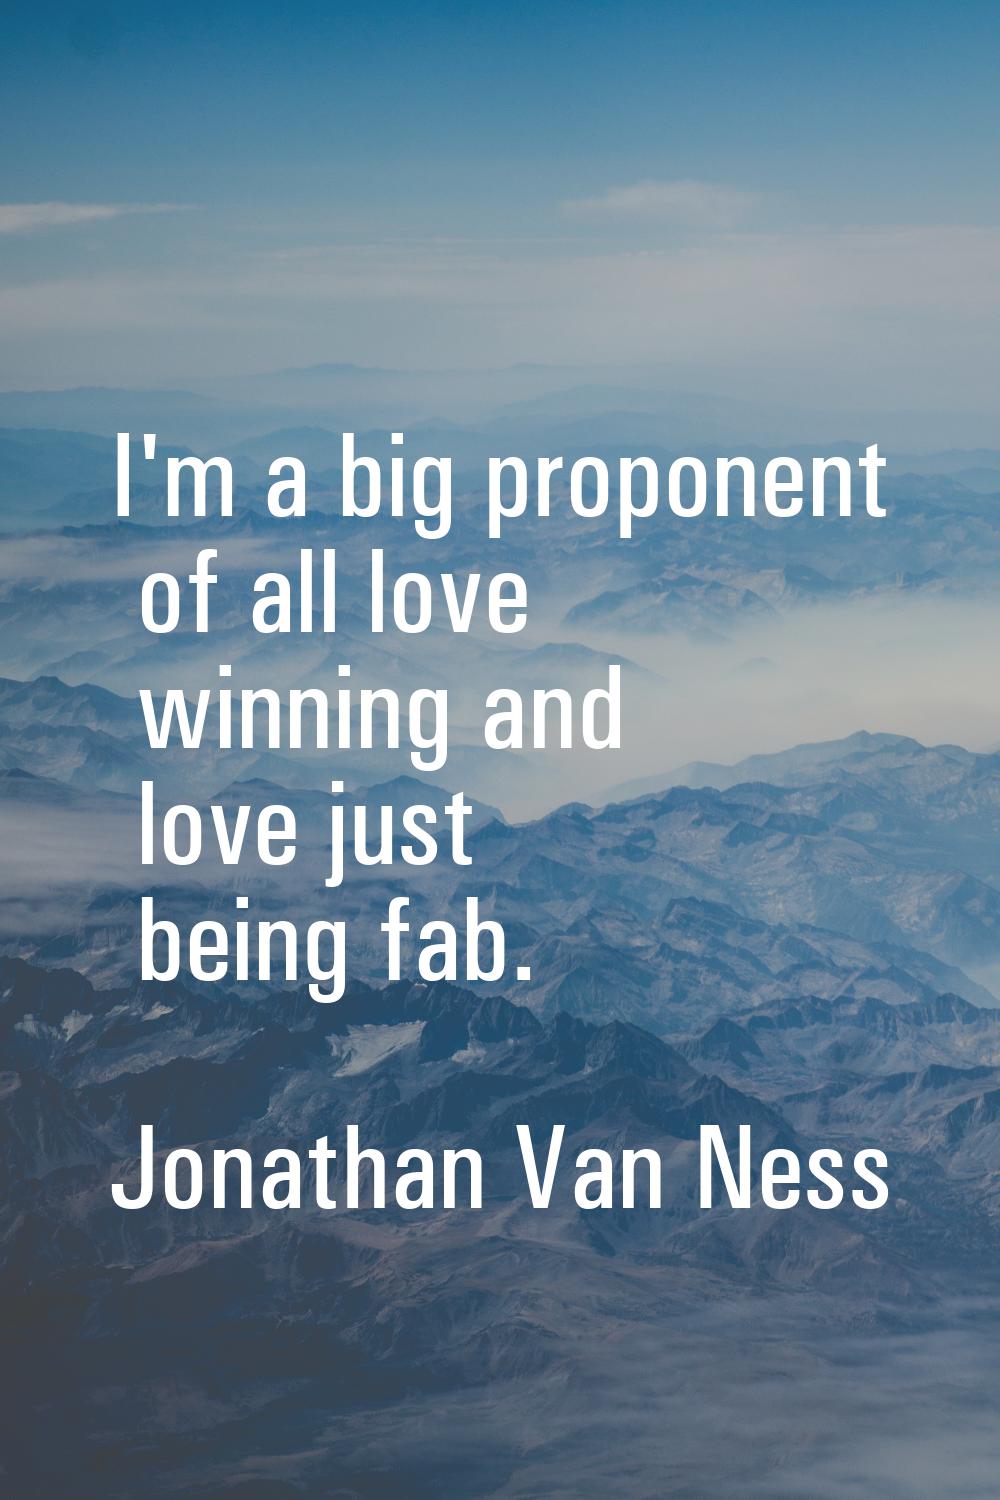 I'm a big proponent of all love winning and love just being fab.